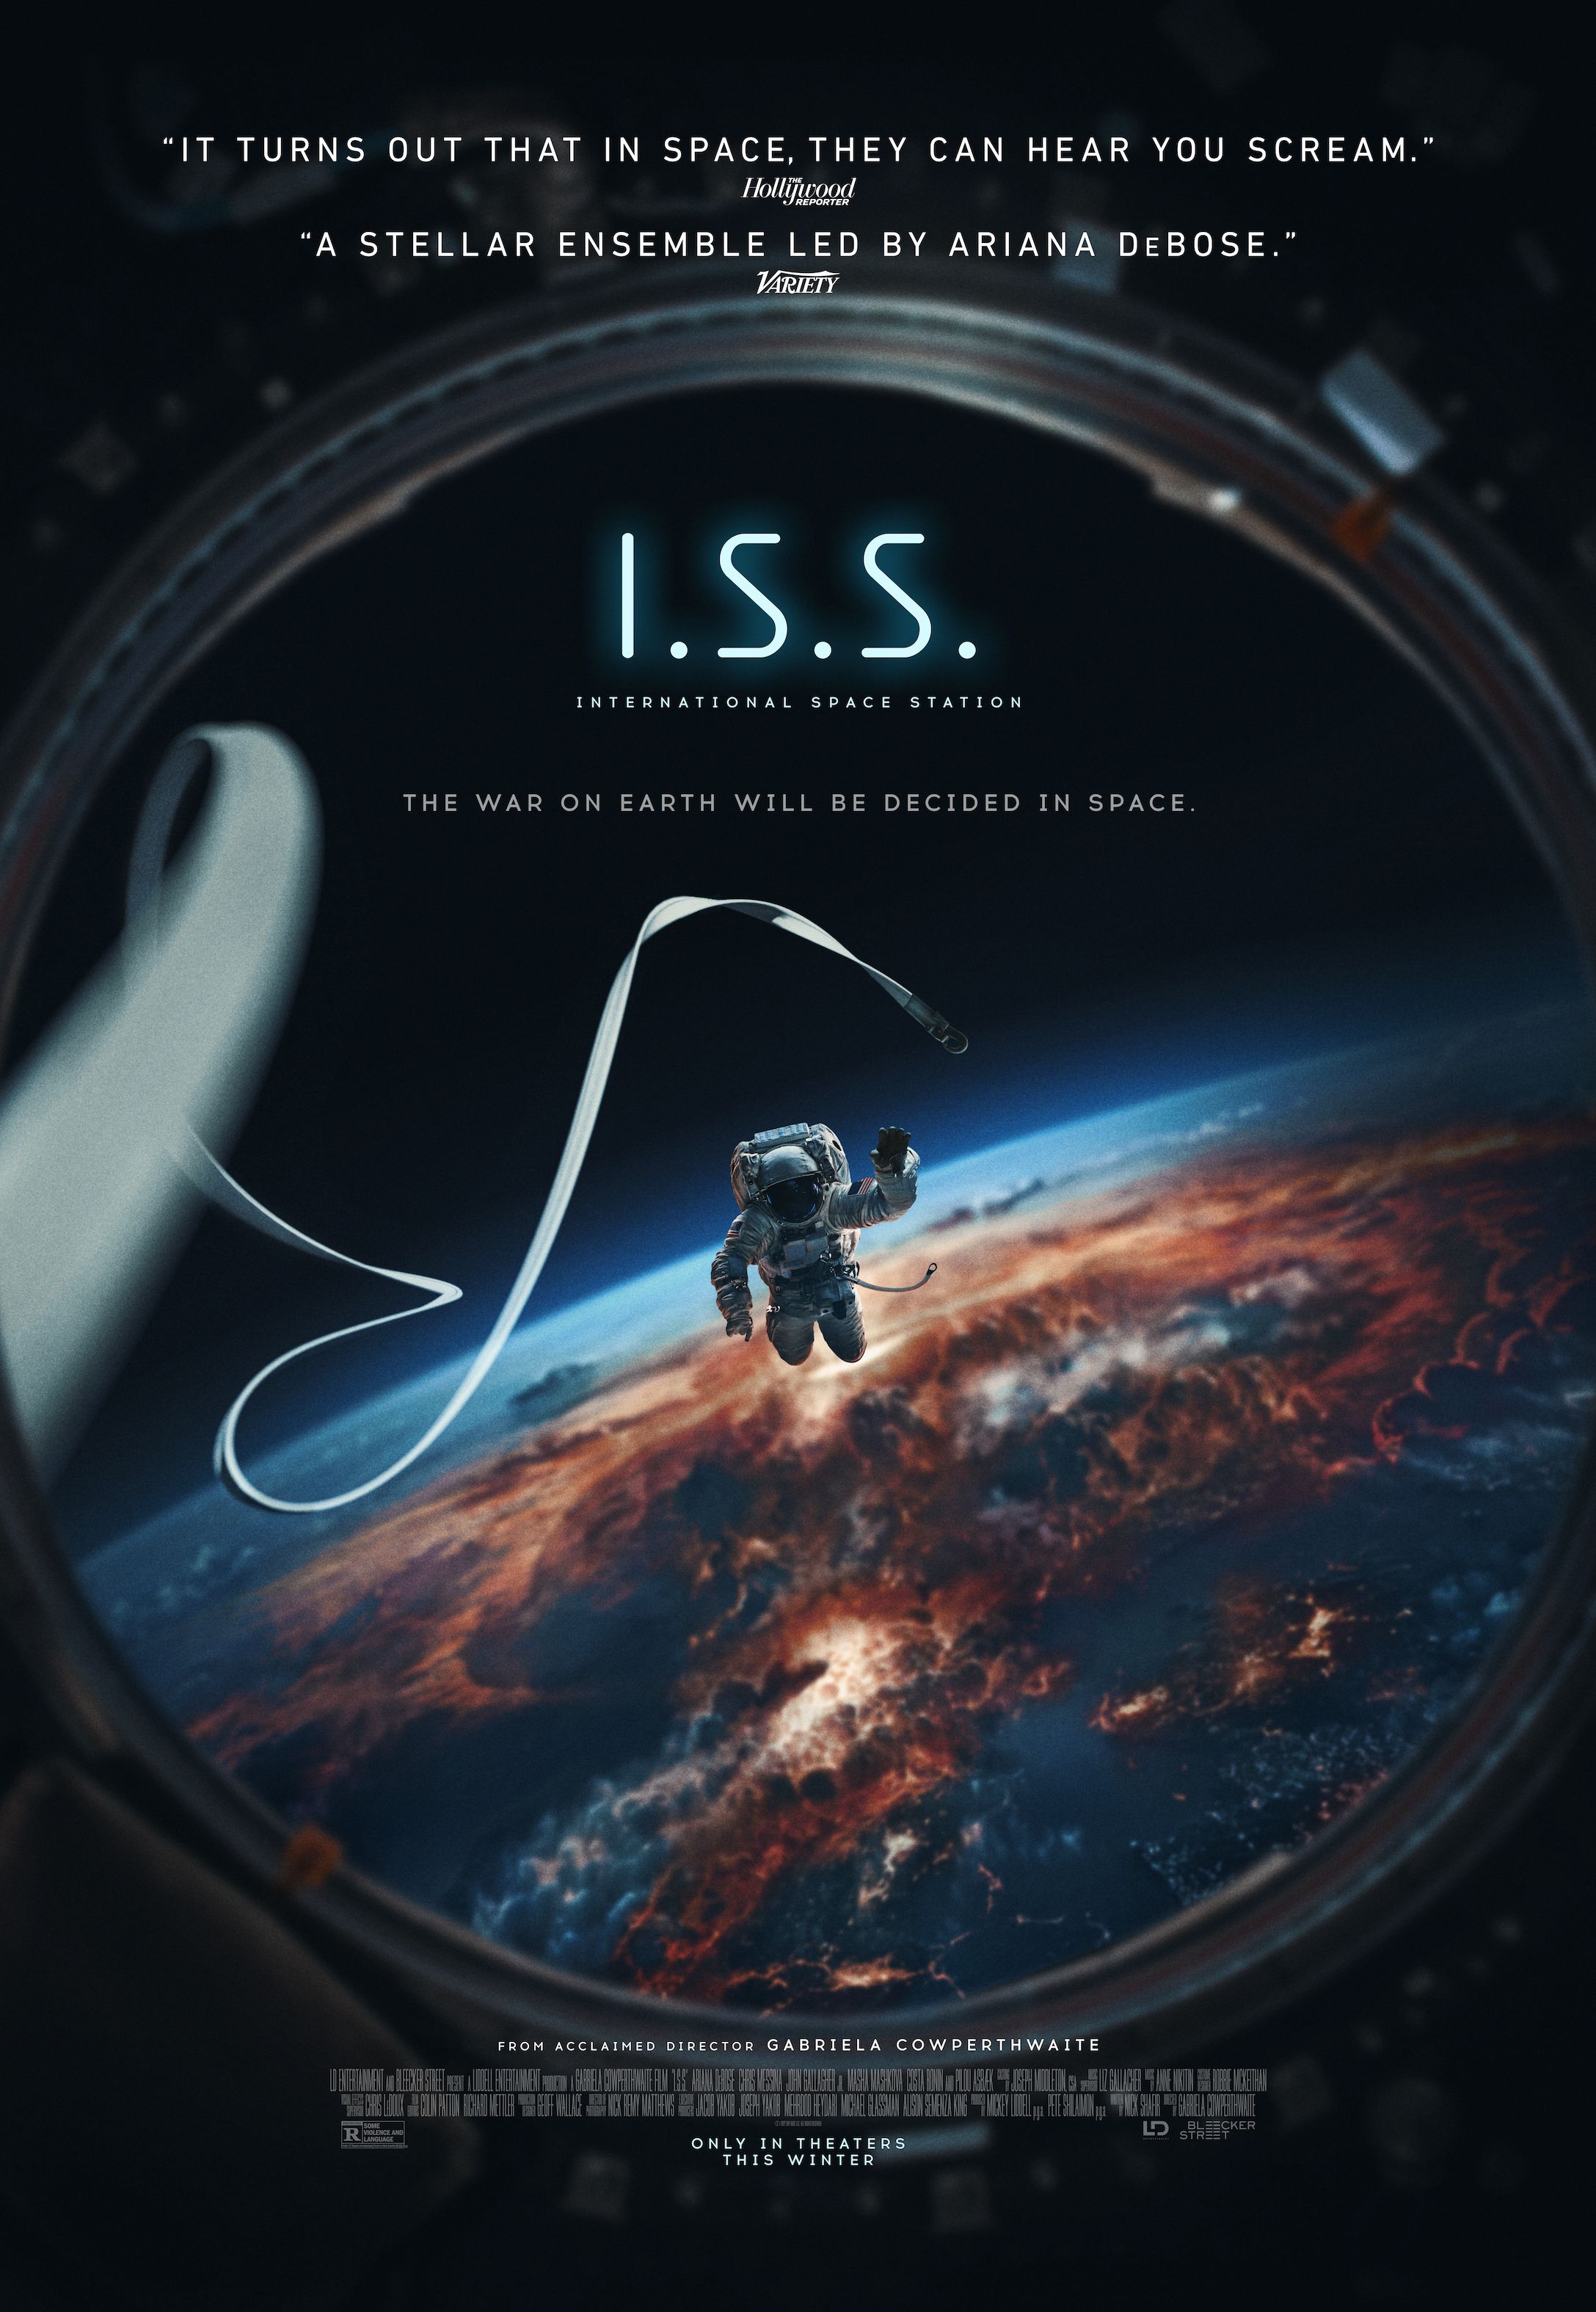 Movie Poster for I.S.S.featuring an astronaut drifting away from a window over a world filled with explosions